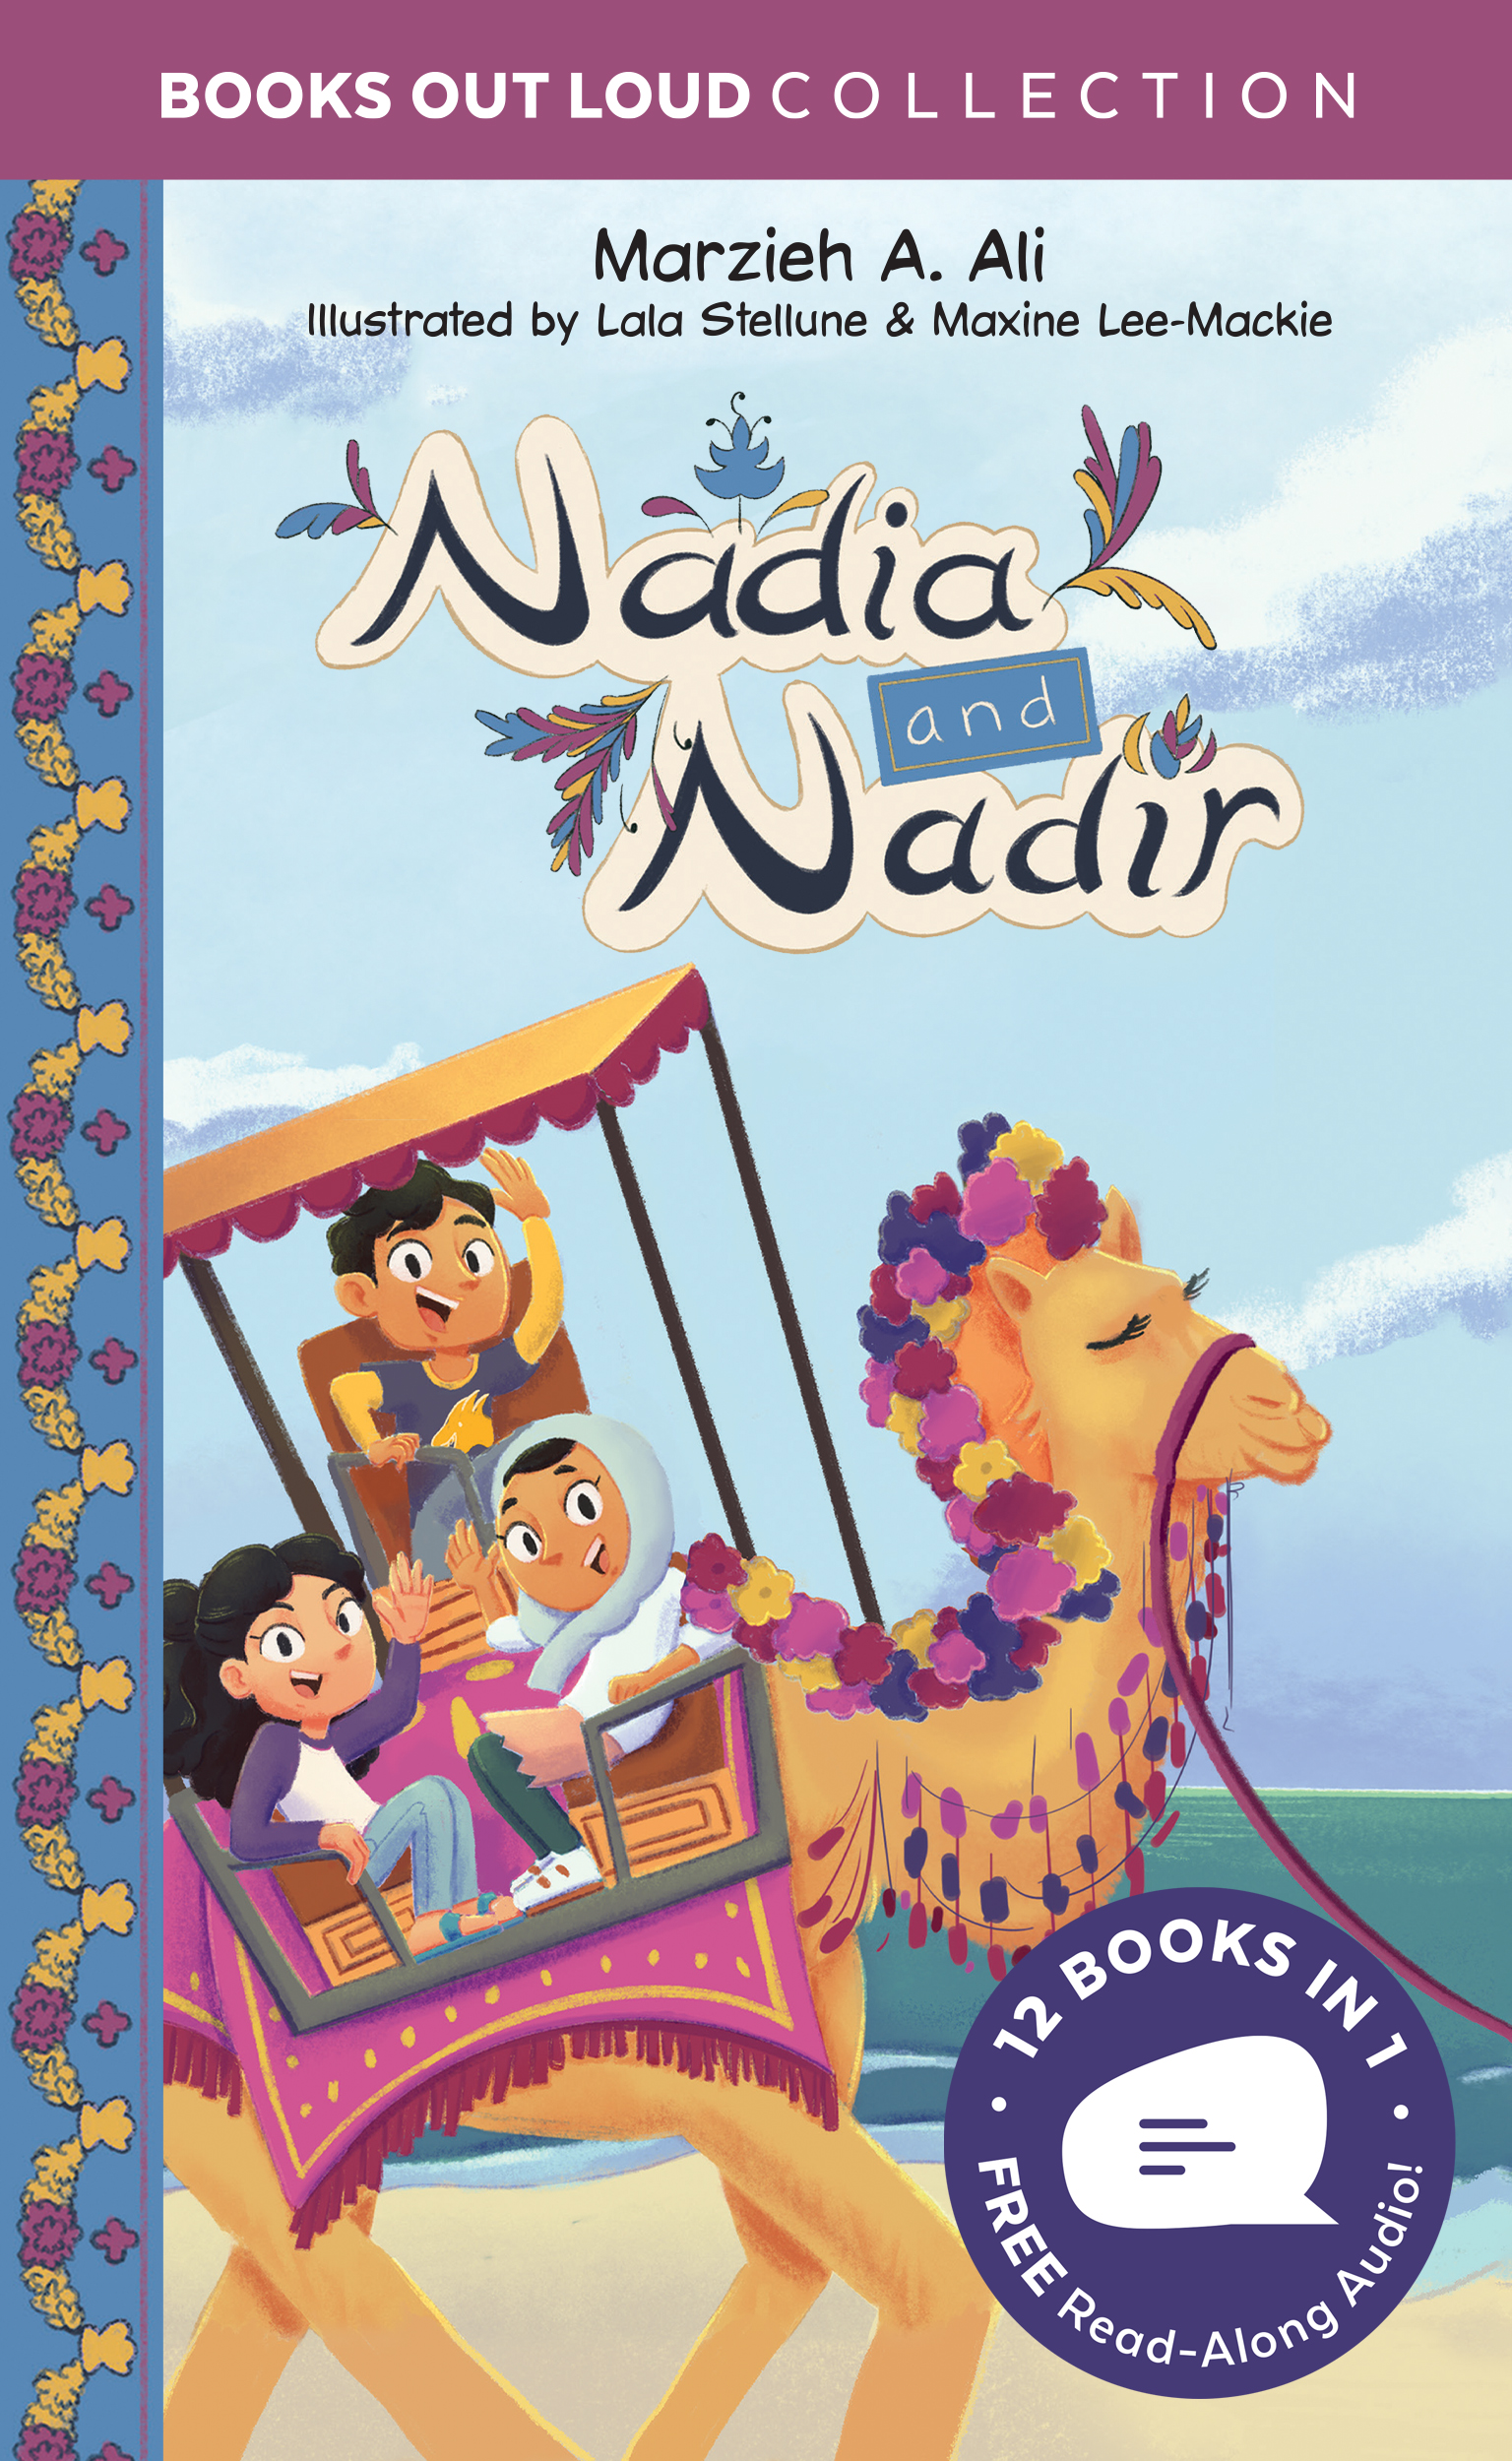 Giveaway: Nadia & Nadir (Marzieh A. Ali)~ US/CAN ONLY!